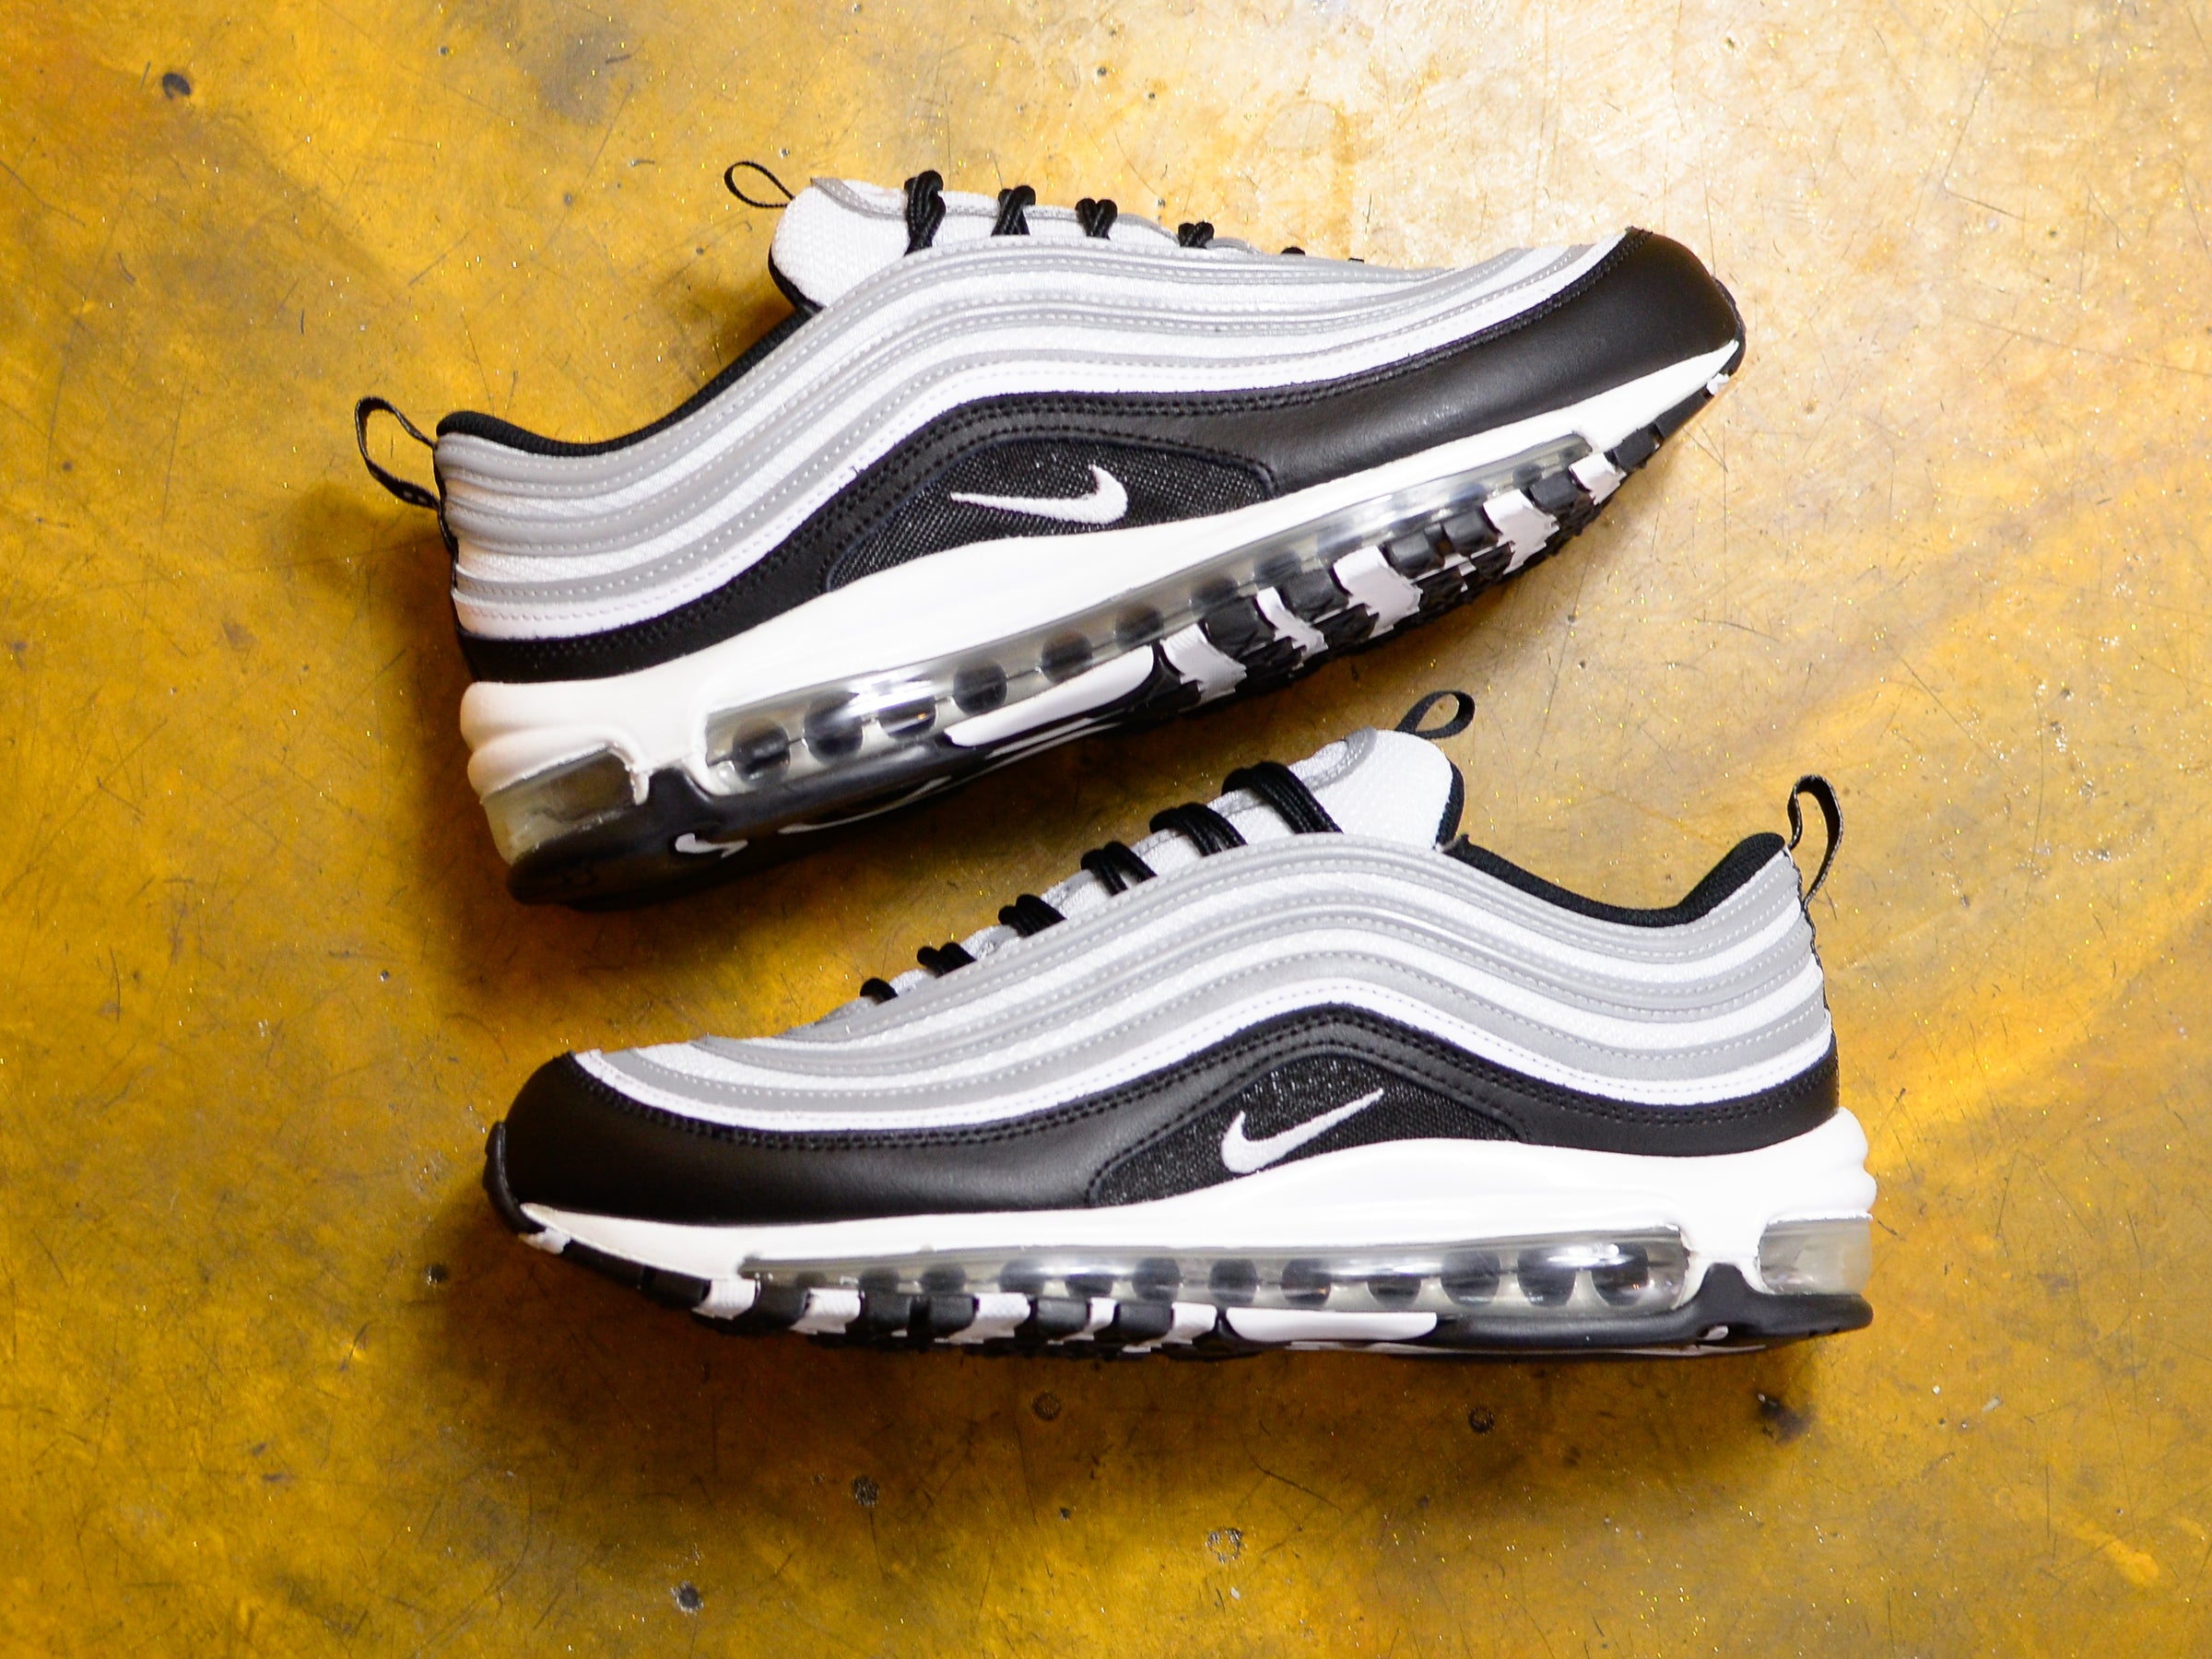 Nike Air Max 97 Faded Black/Reflective Silver/White